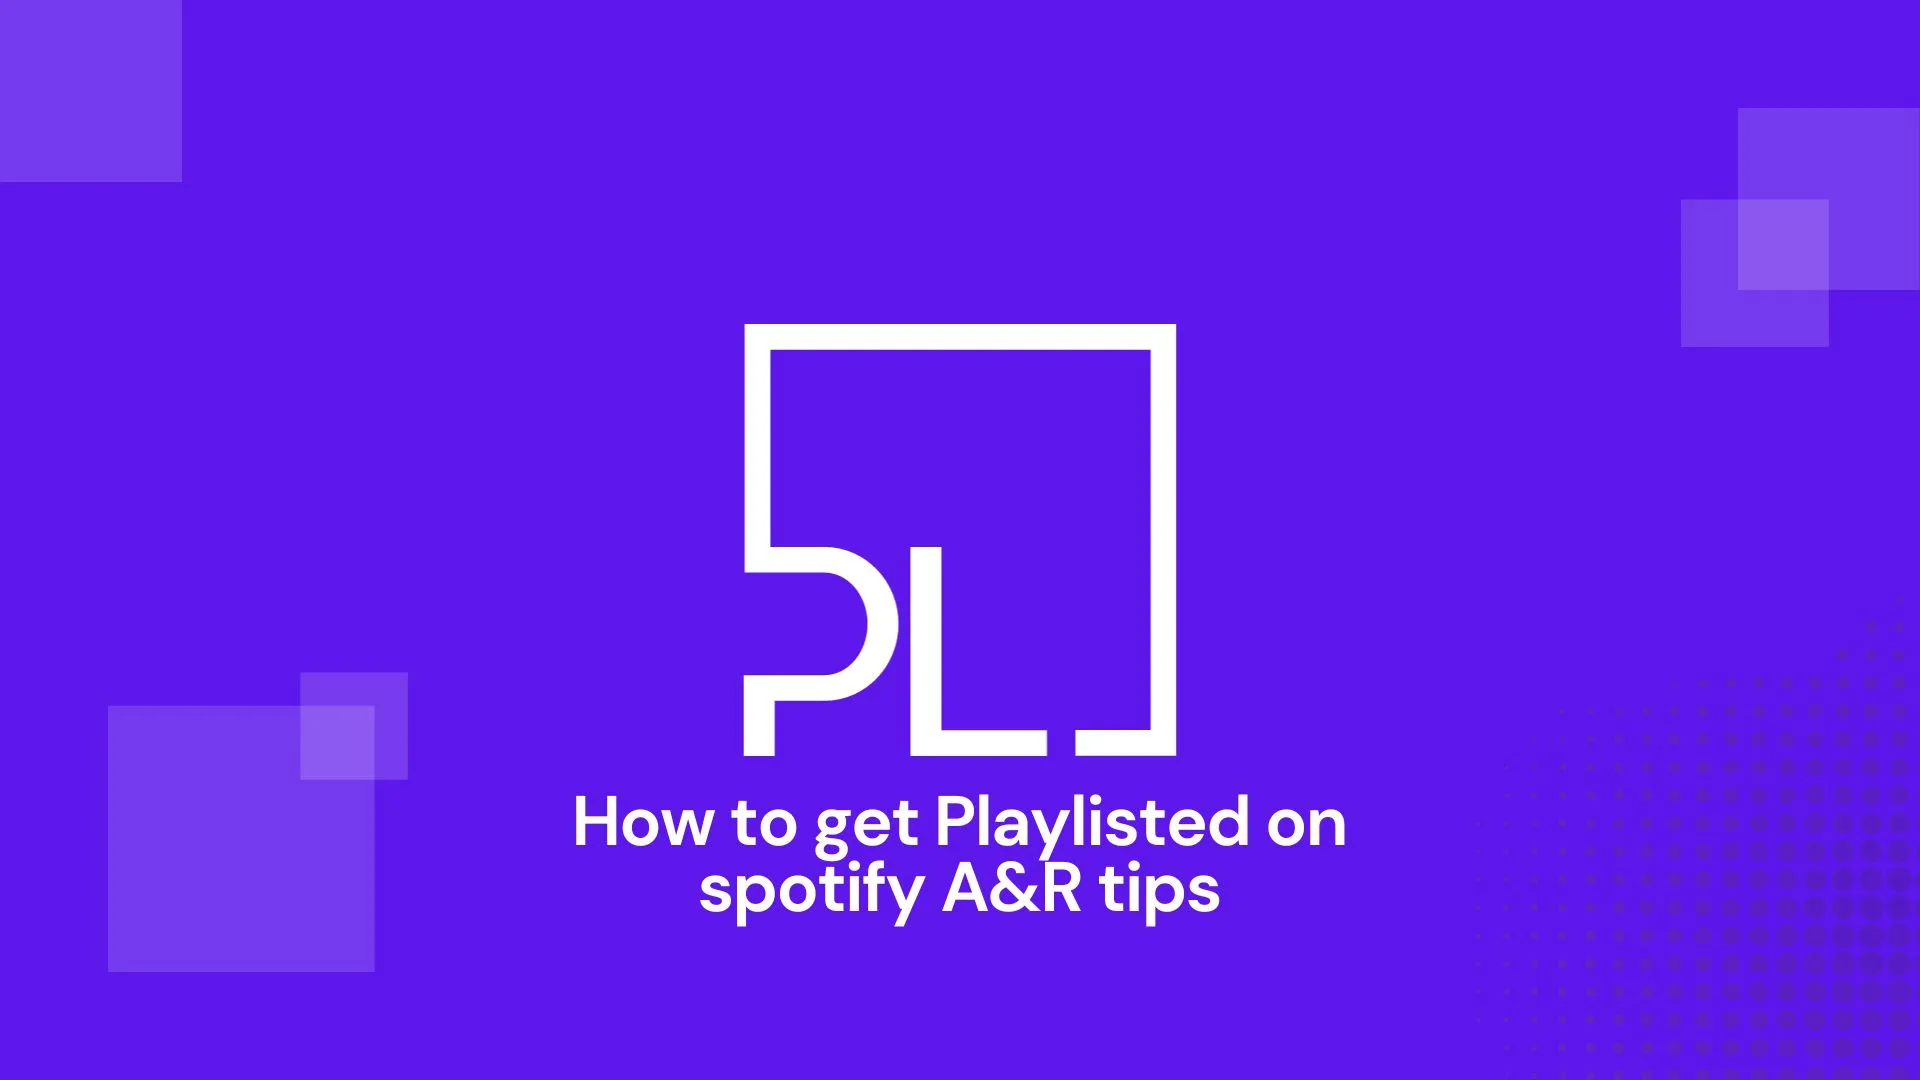 HOW TO GET PLAYLISTED ON SPOTIFY A&R TIPS